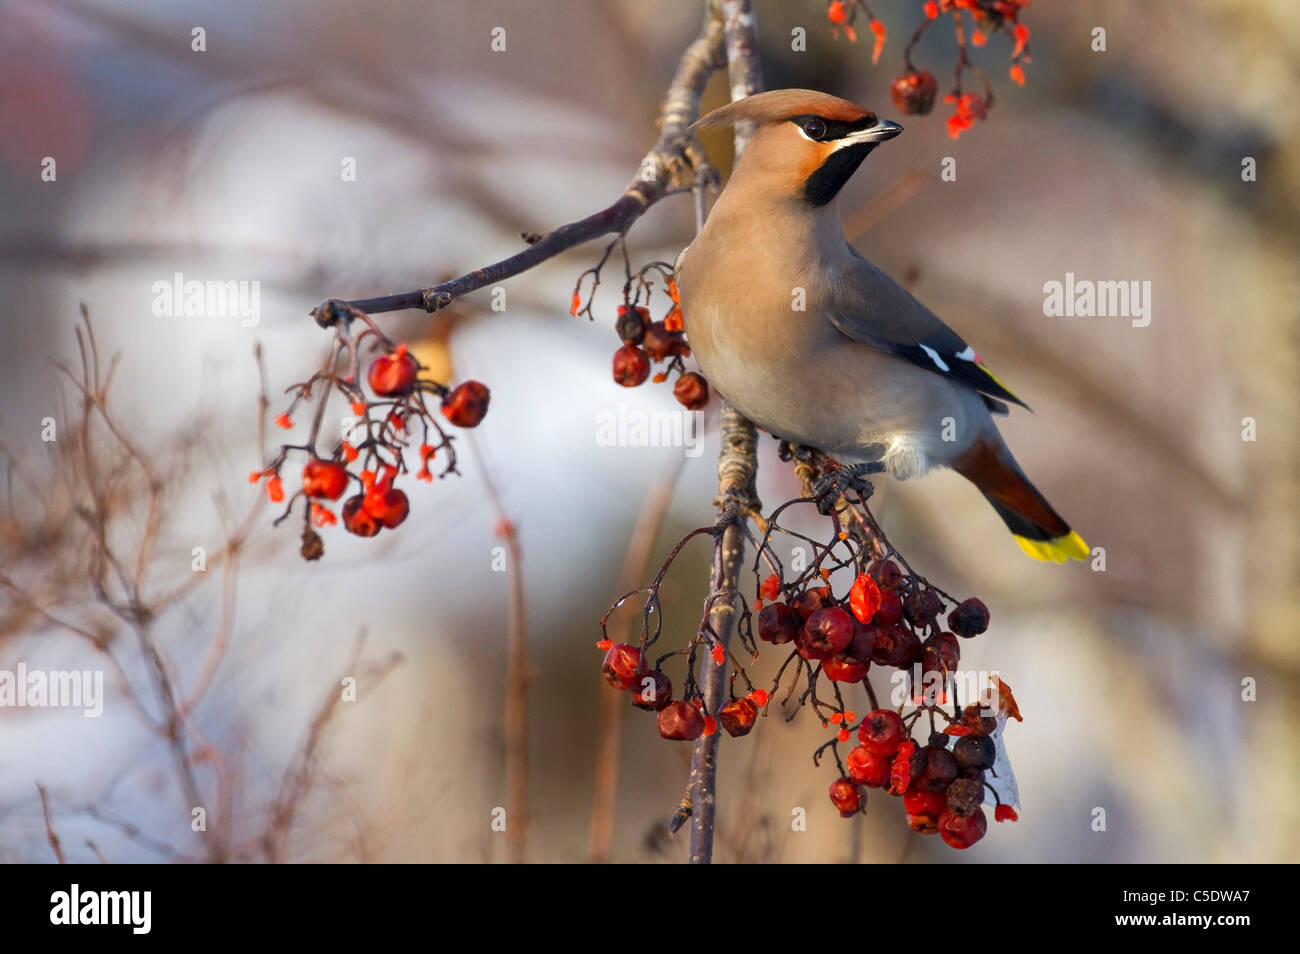 Close-up side shot of Waxwing on branch with berries against blurred background Stock Photo